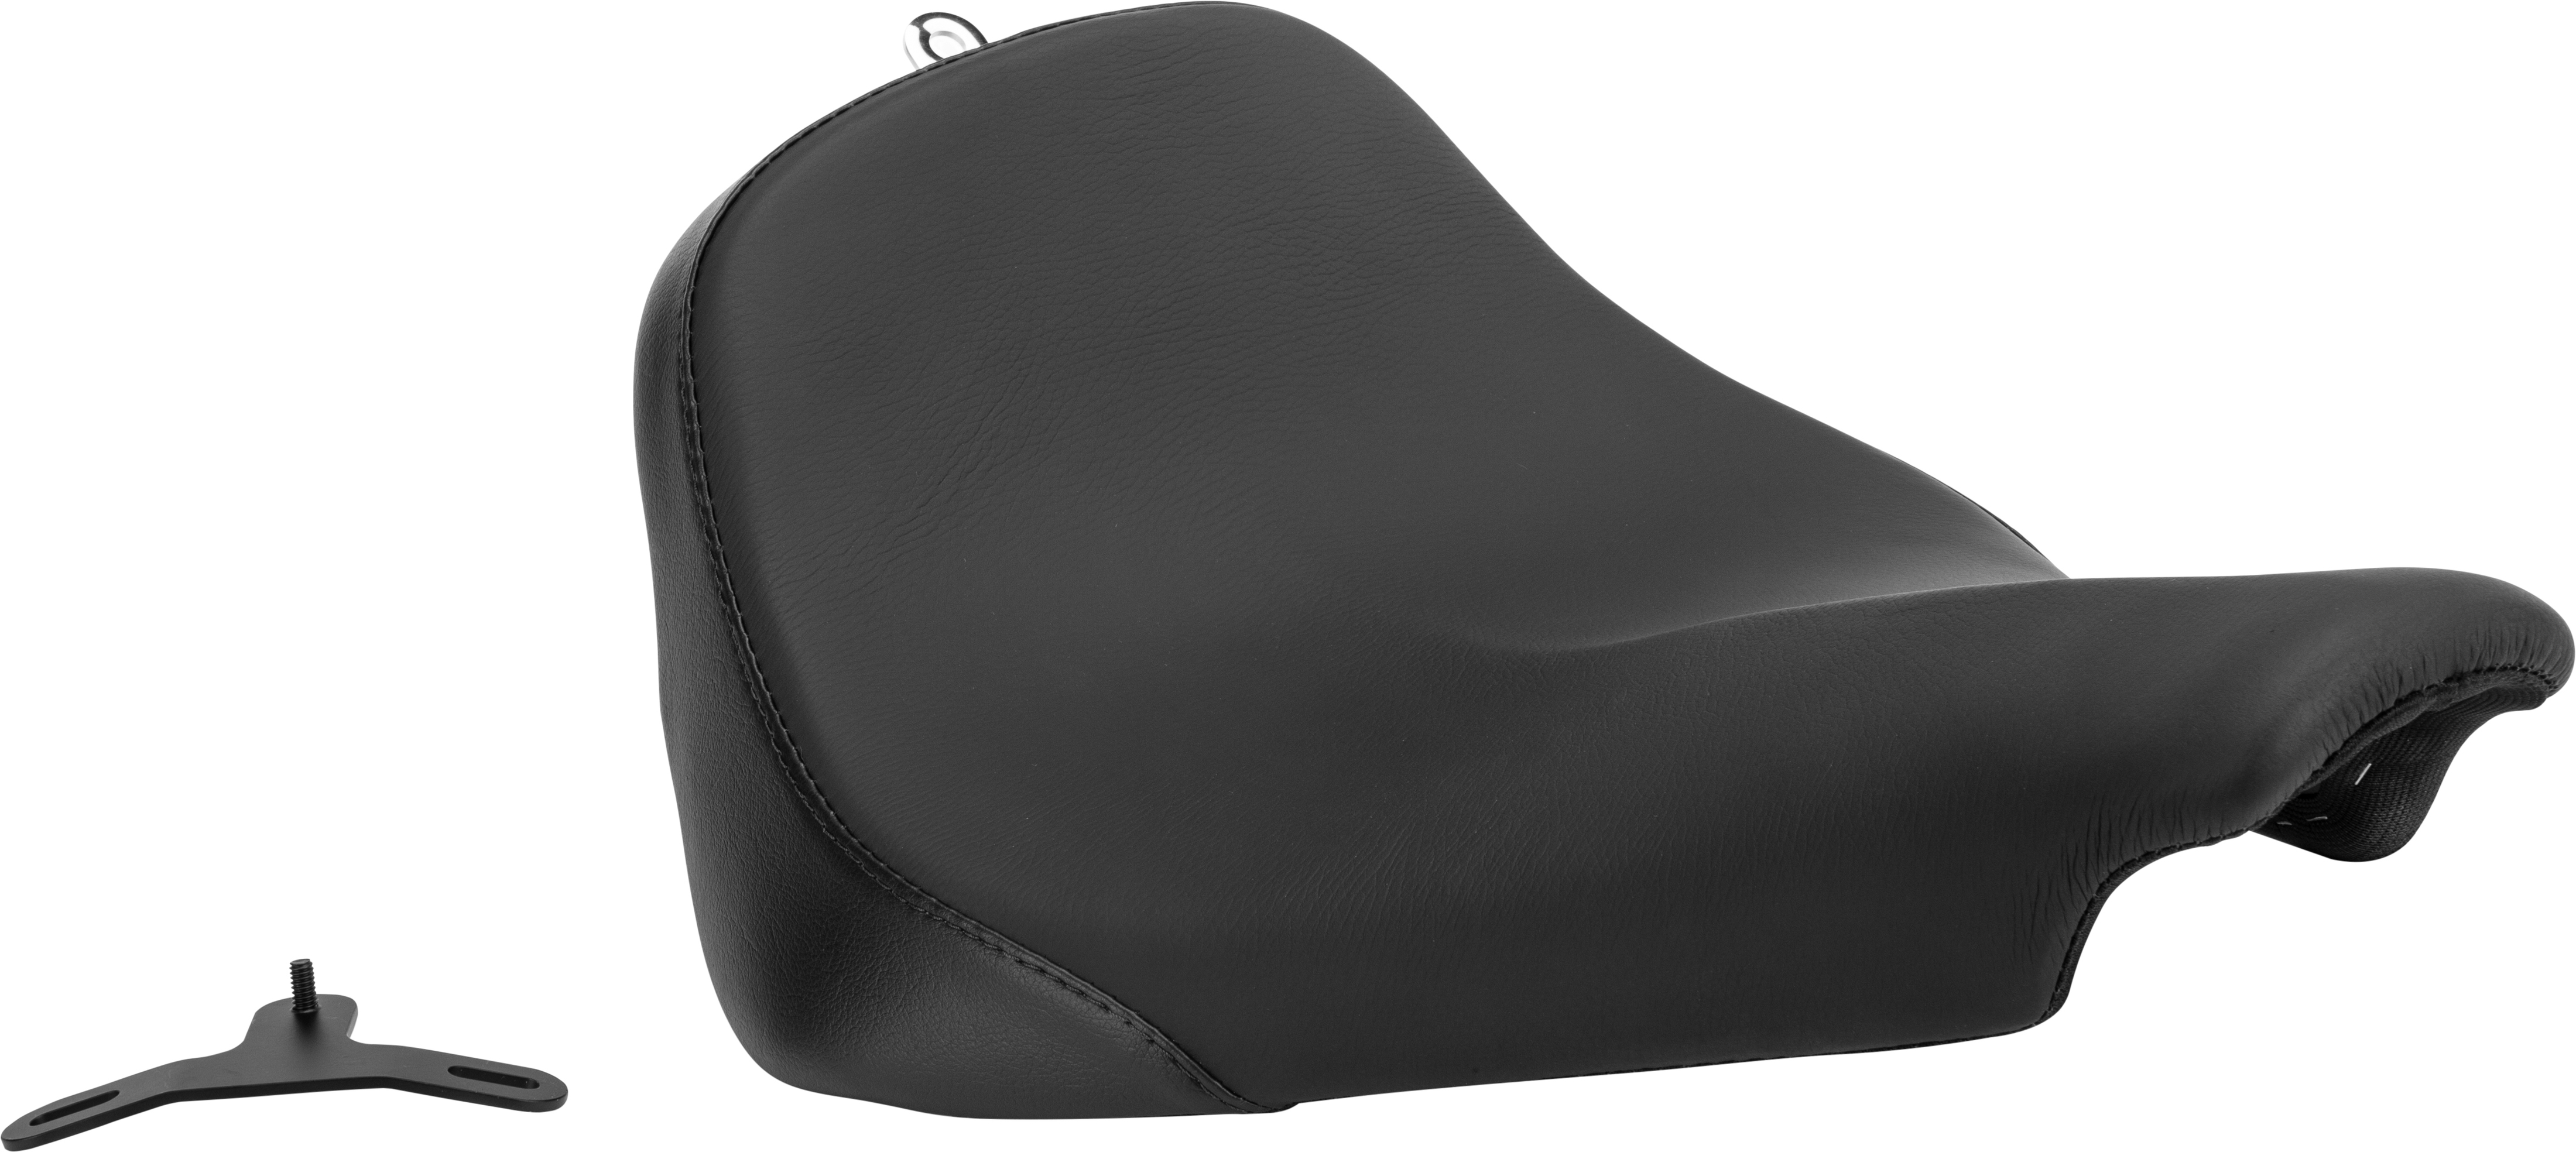 Buttcrack Solo Seat Very Low&Back - For 13-17 Harley FXSB Breakout - Click Image to Close